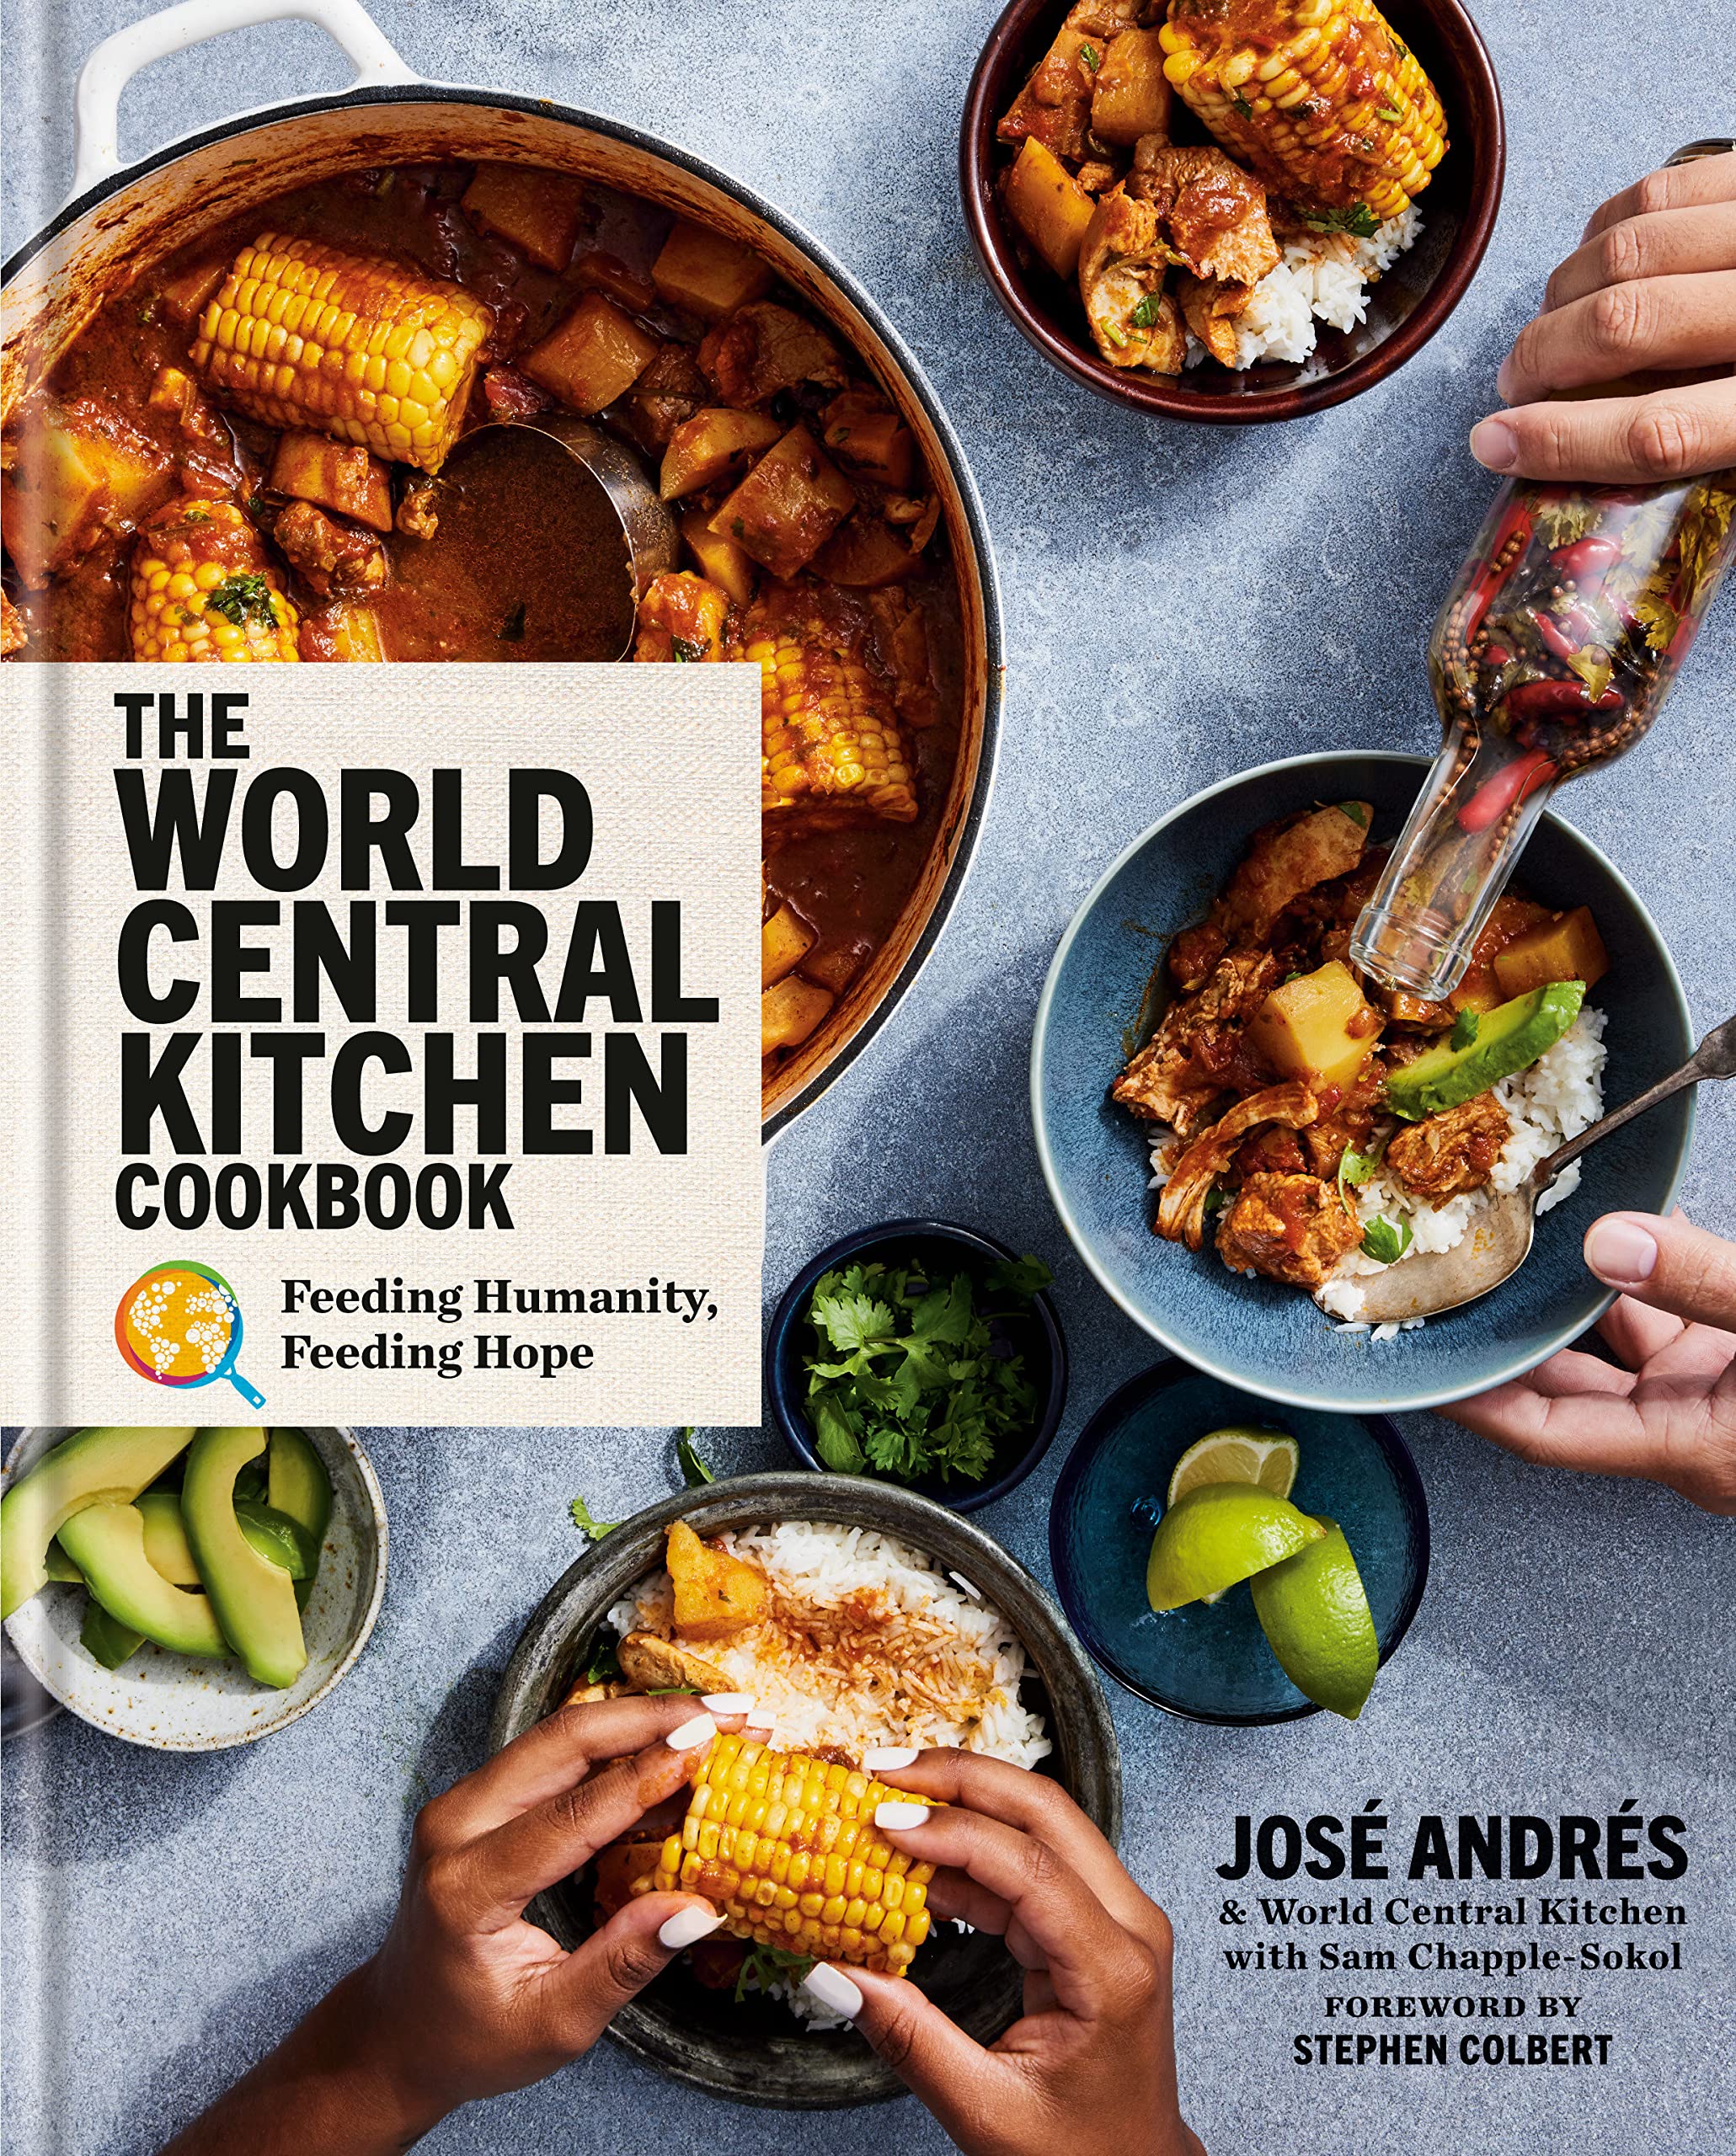 The World Central Kitchen Cookbook: Feeding Humanity, Feeding Hope (José Andrés, World Central Kitchen) *Signed*